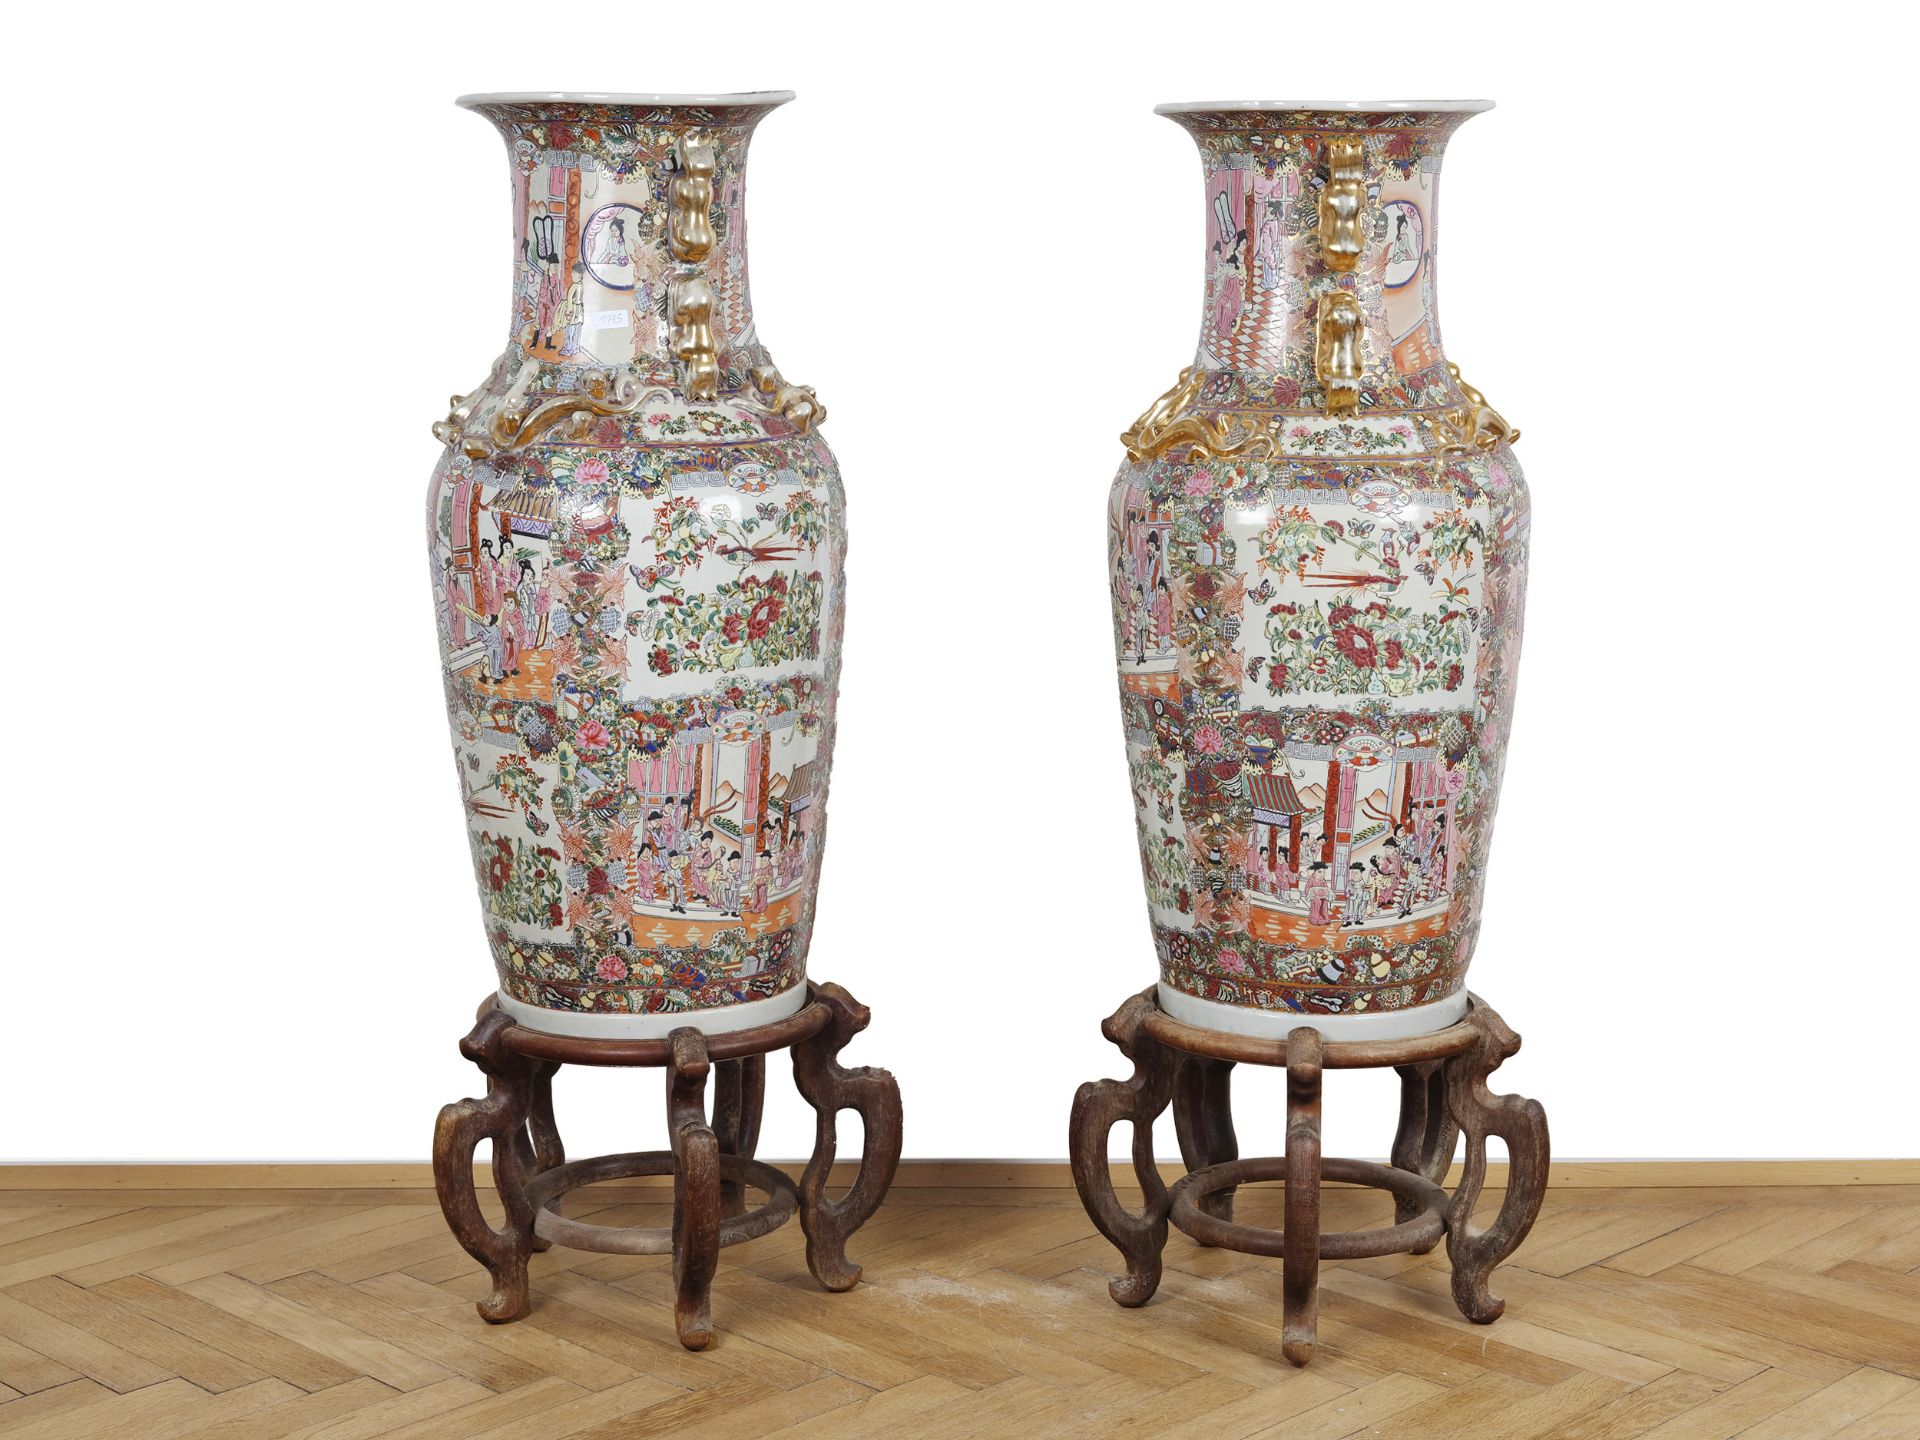 Pair of vases with wooden base, China - Image 3 of 5